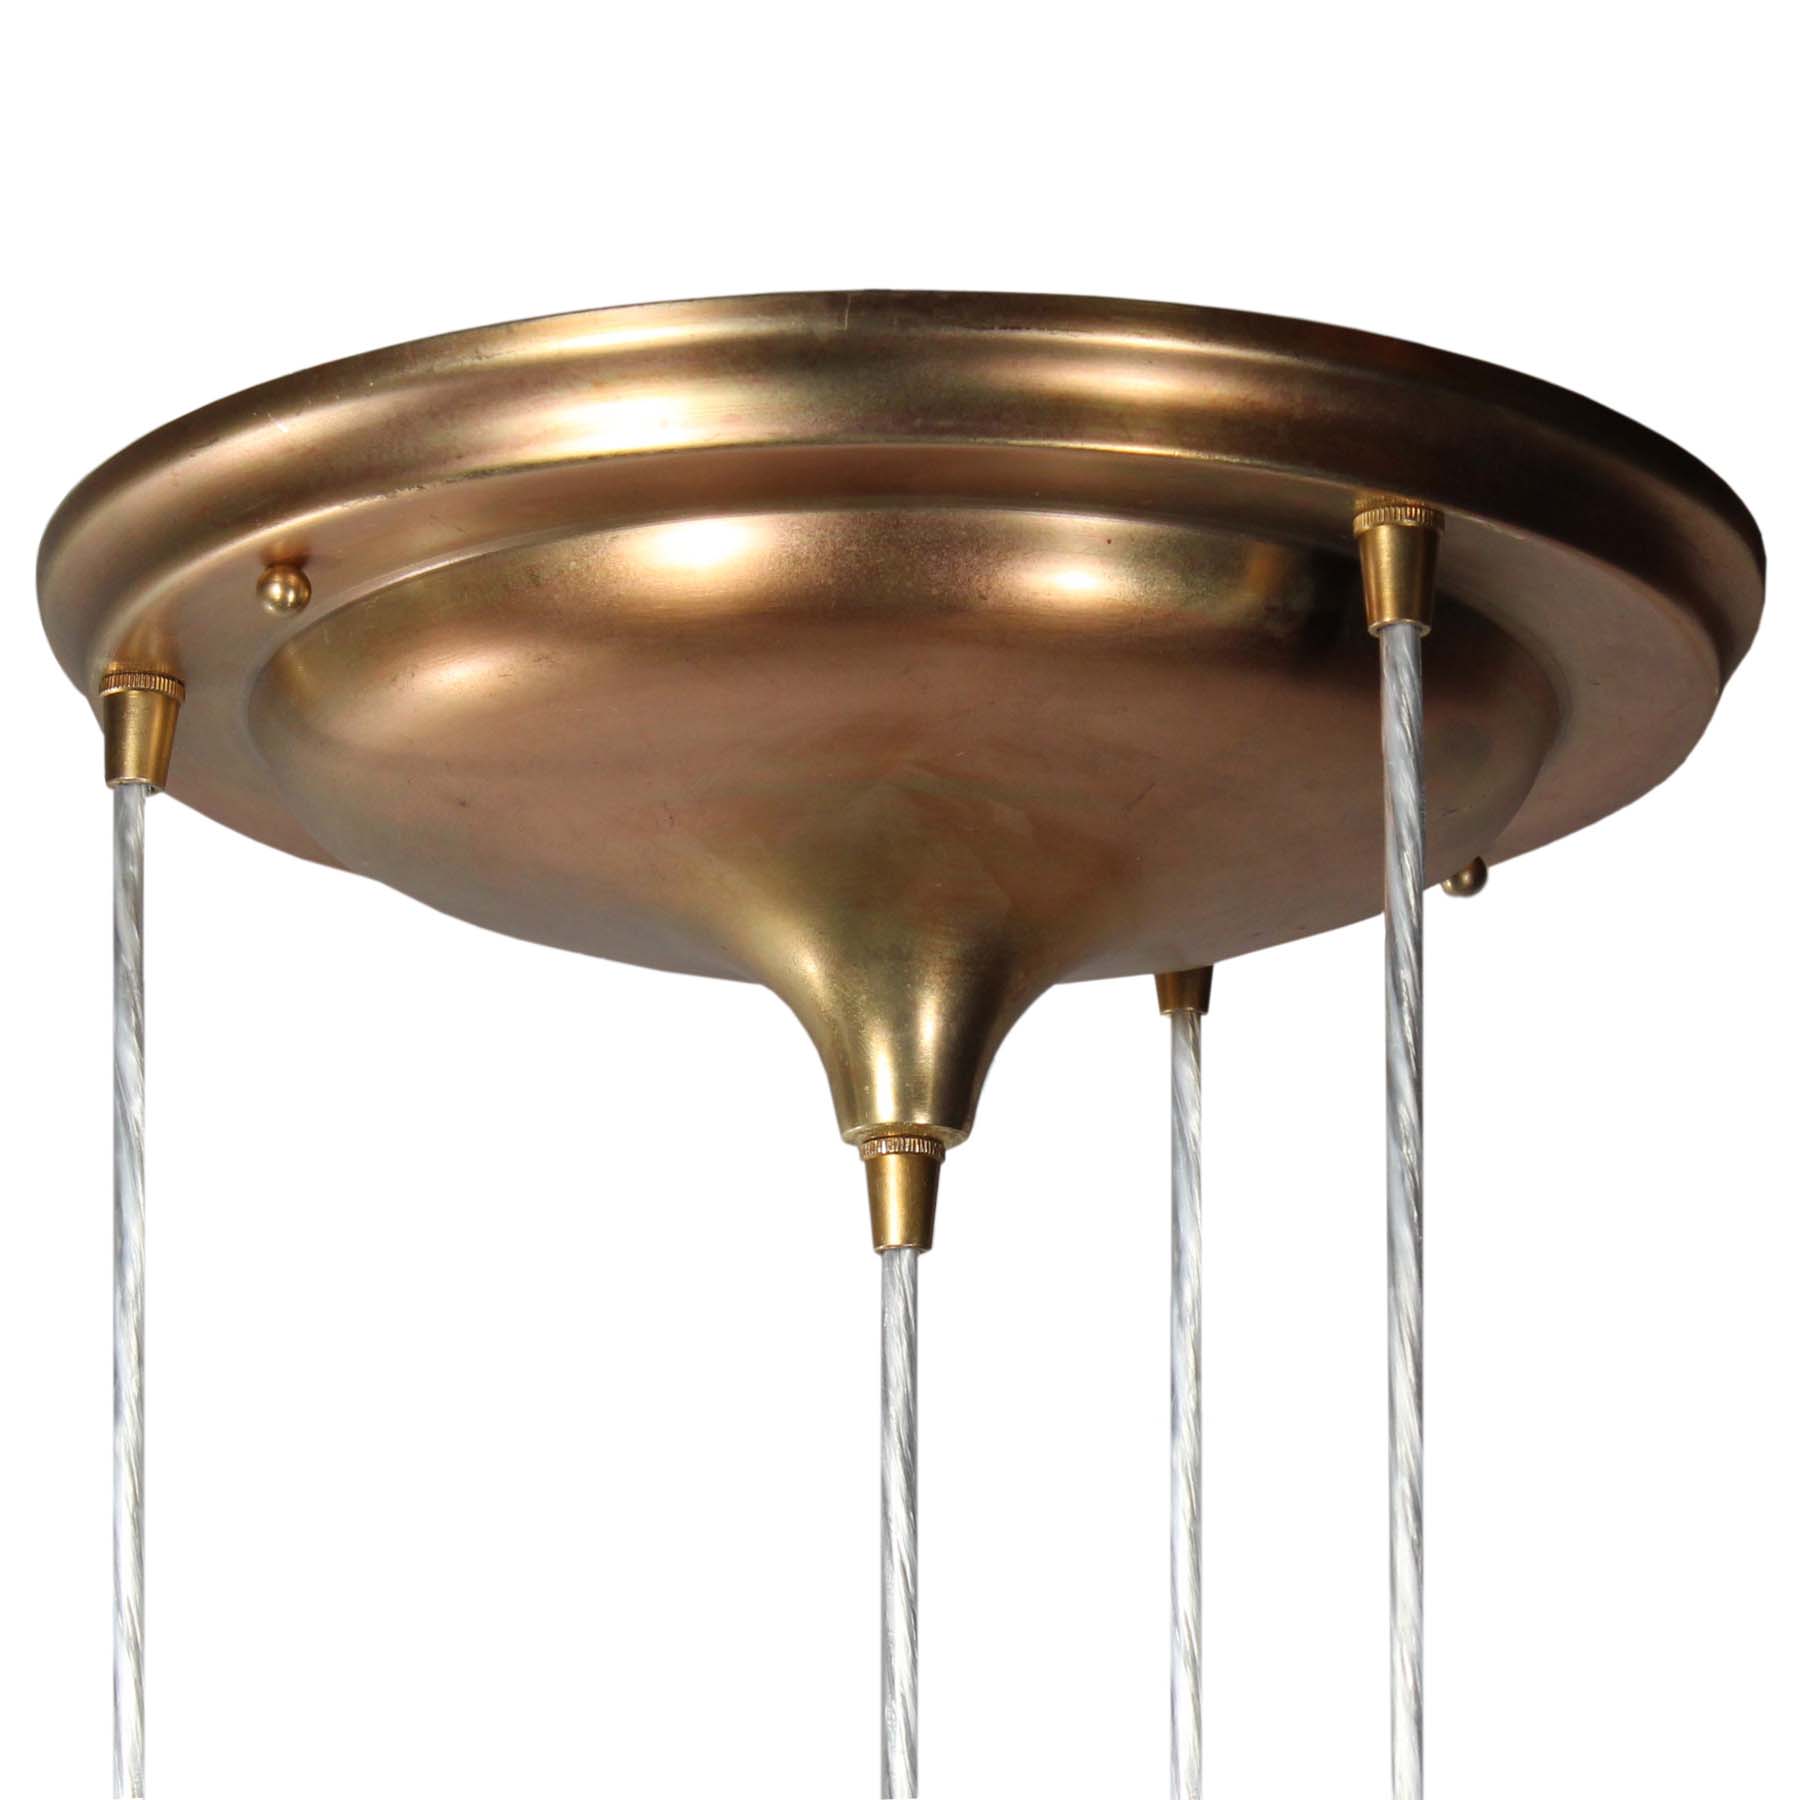 SOLD Semi Flush-Mount Chandelier with Ball Shades, Antique Lighting-70142